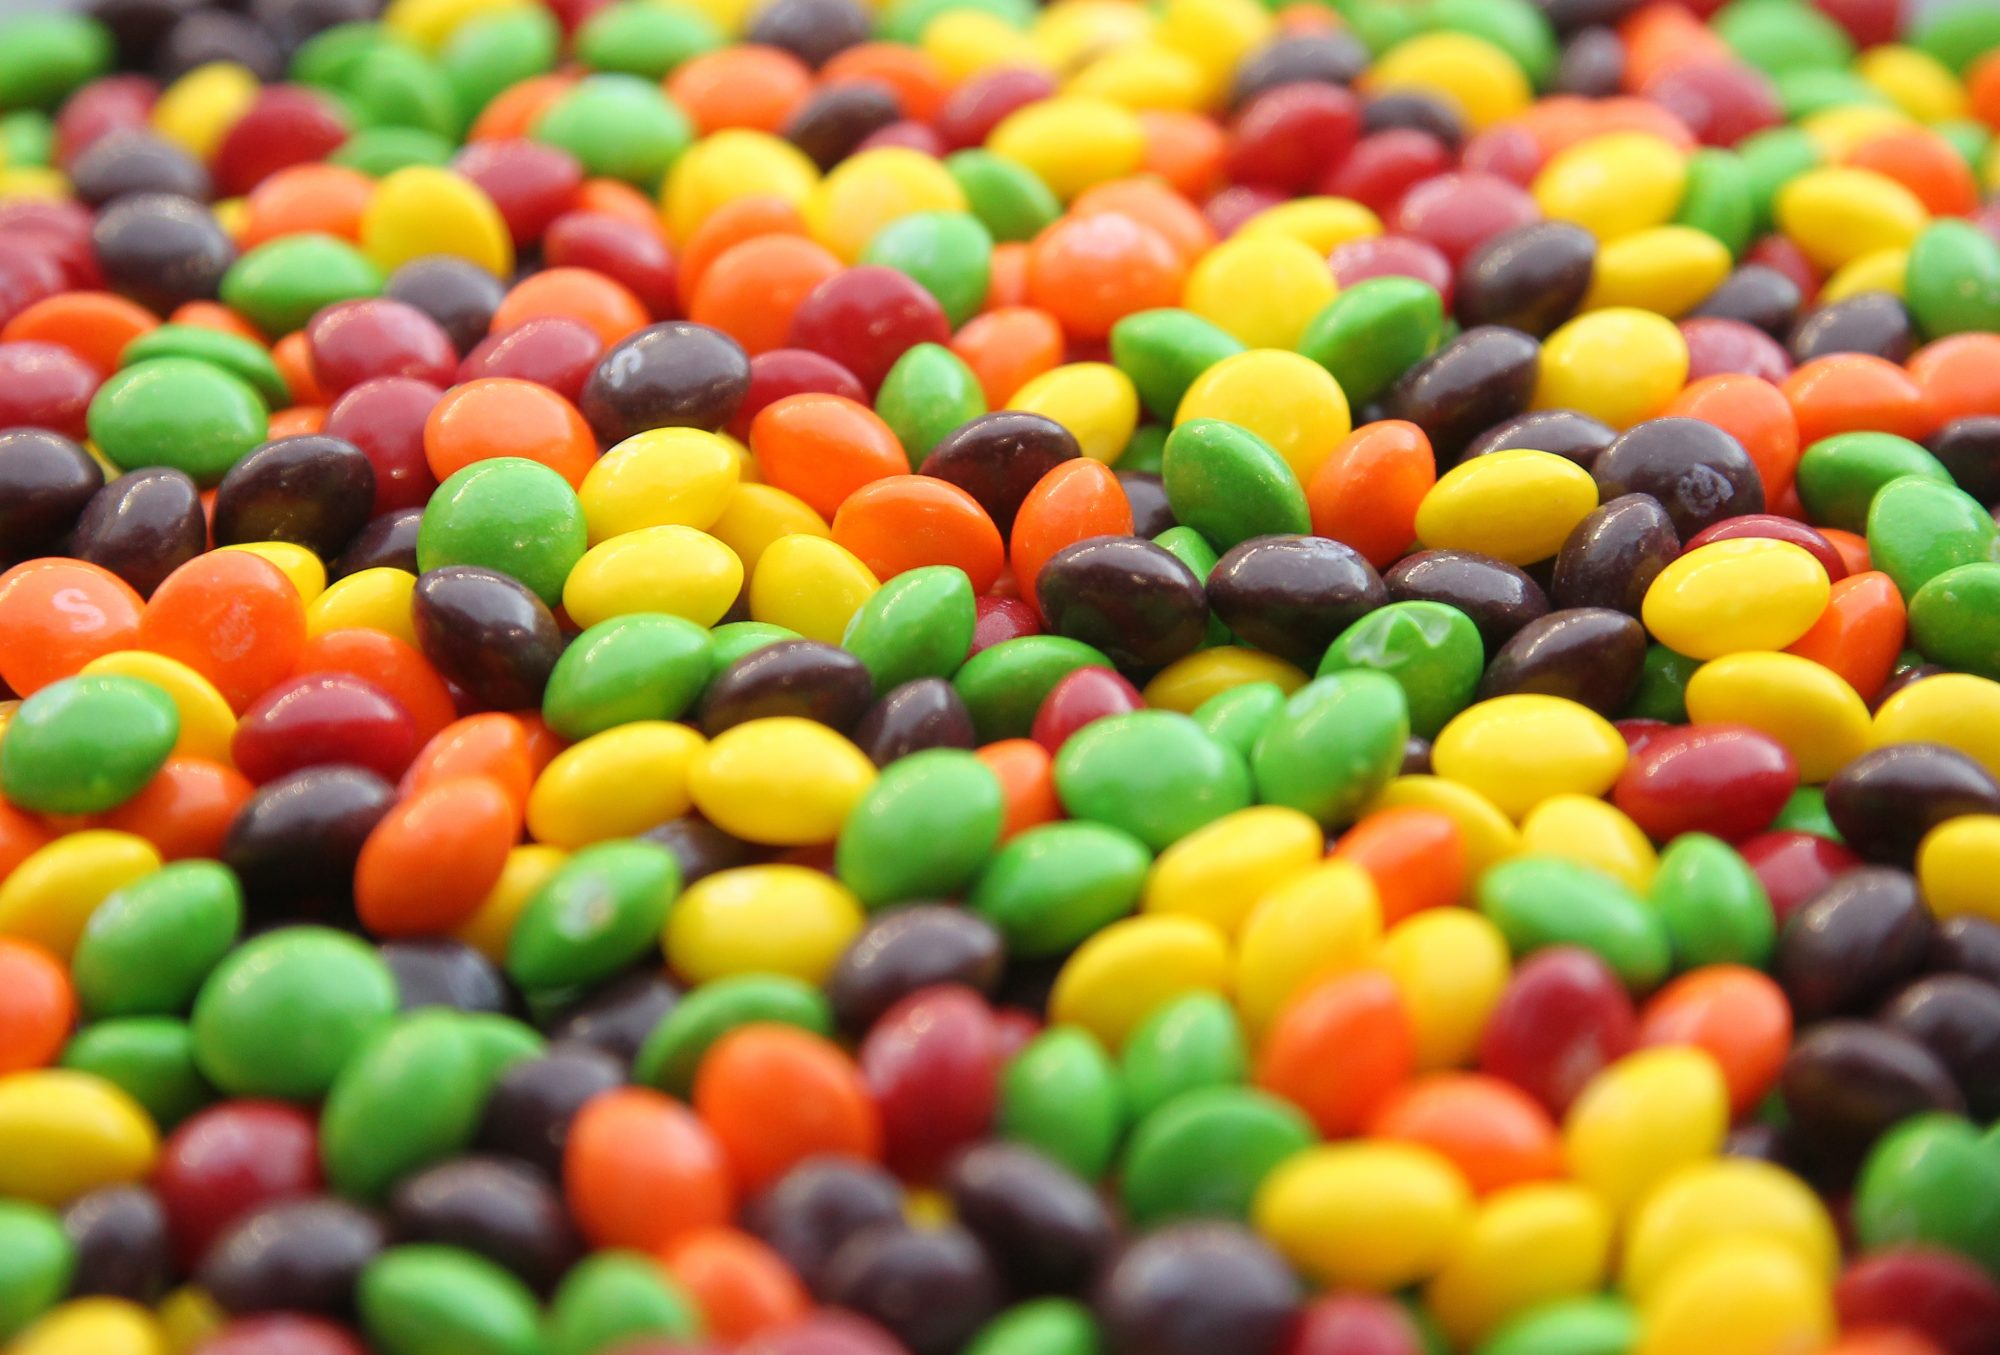 Milwaukee Tool Buys M&M Candies, Eliminates all Colors Except Red 